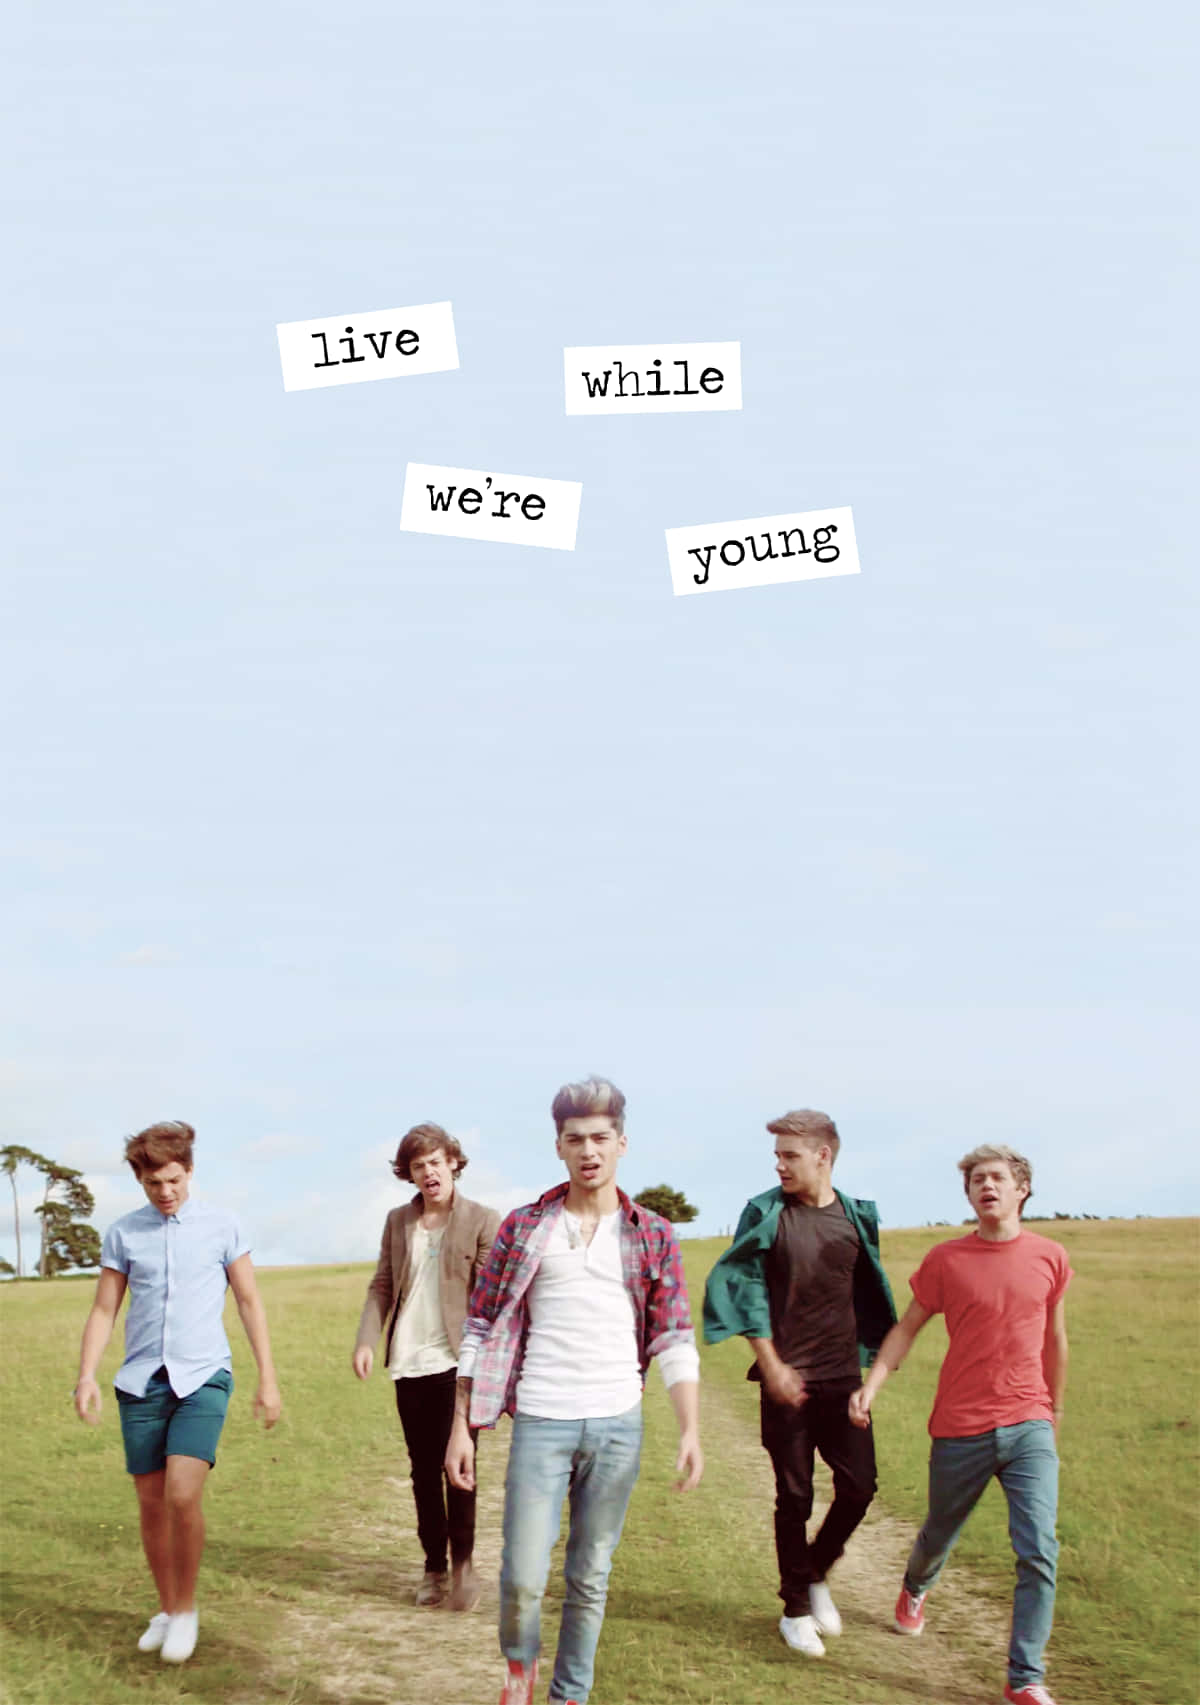 Live While Were Young 1 Direction Iphone Wallpaper